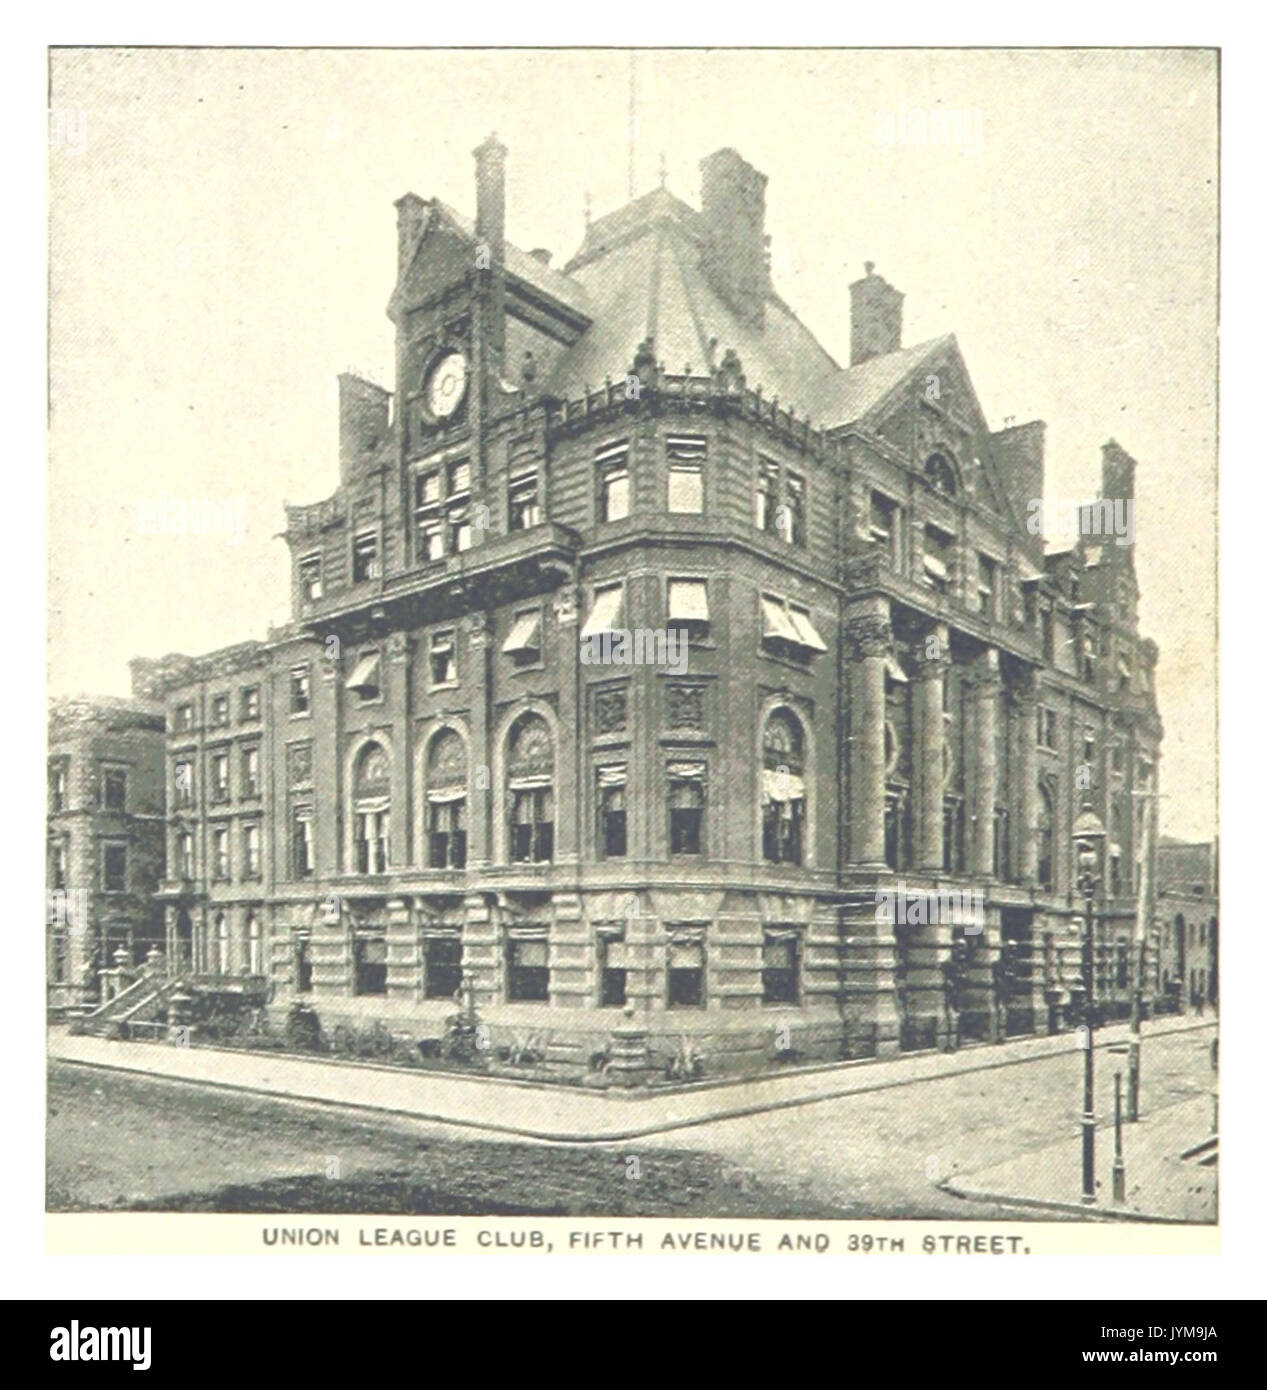 (King1893NYC) pg550 UNION LEAGUE CLUB, FIFTH AVENUE AND 39TH STREET Stock Photo